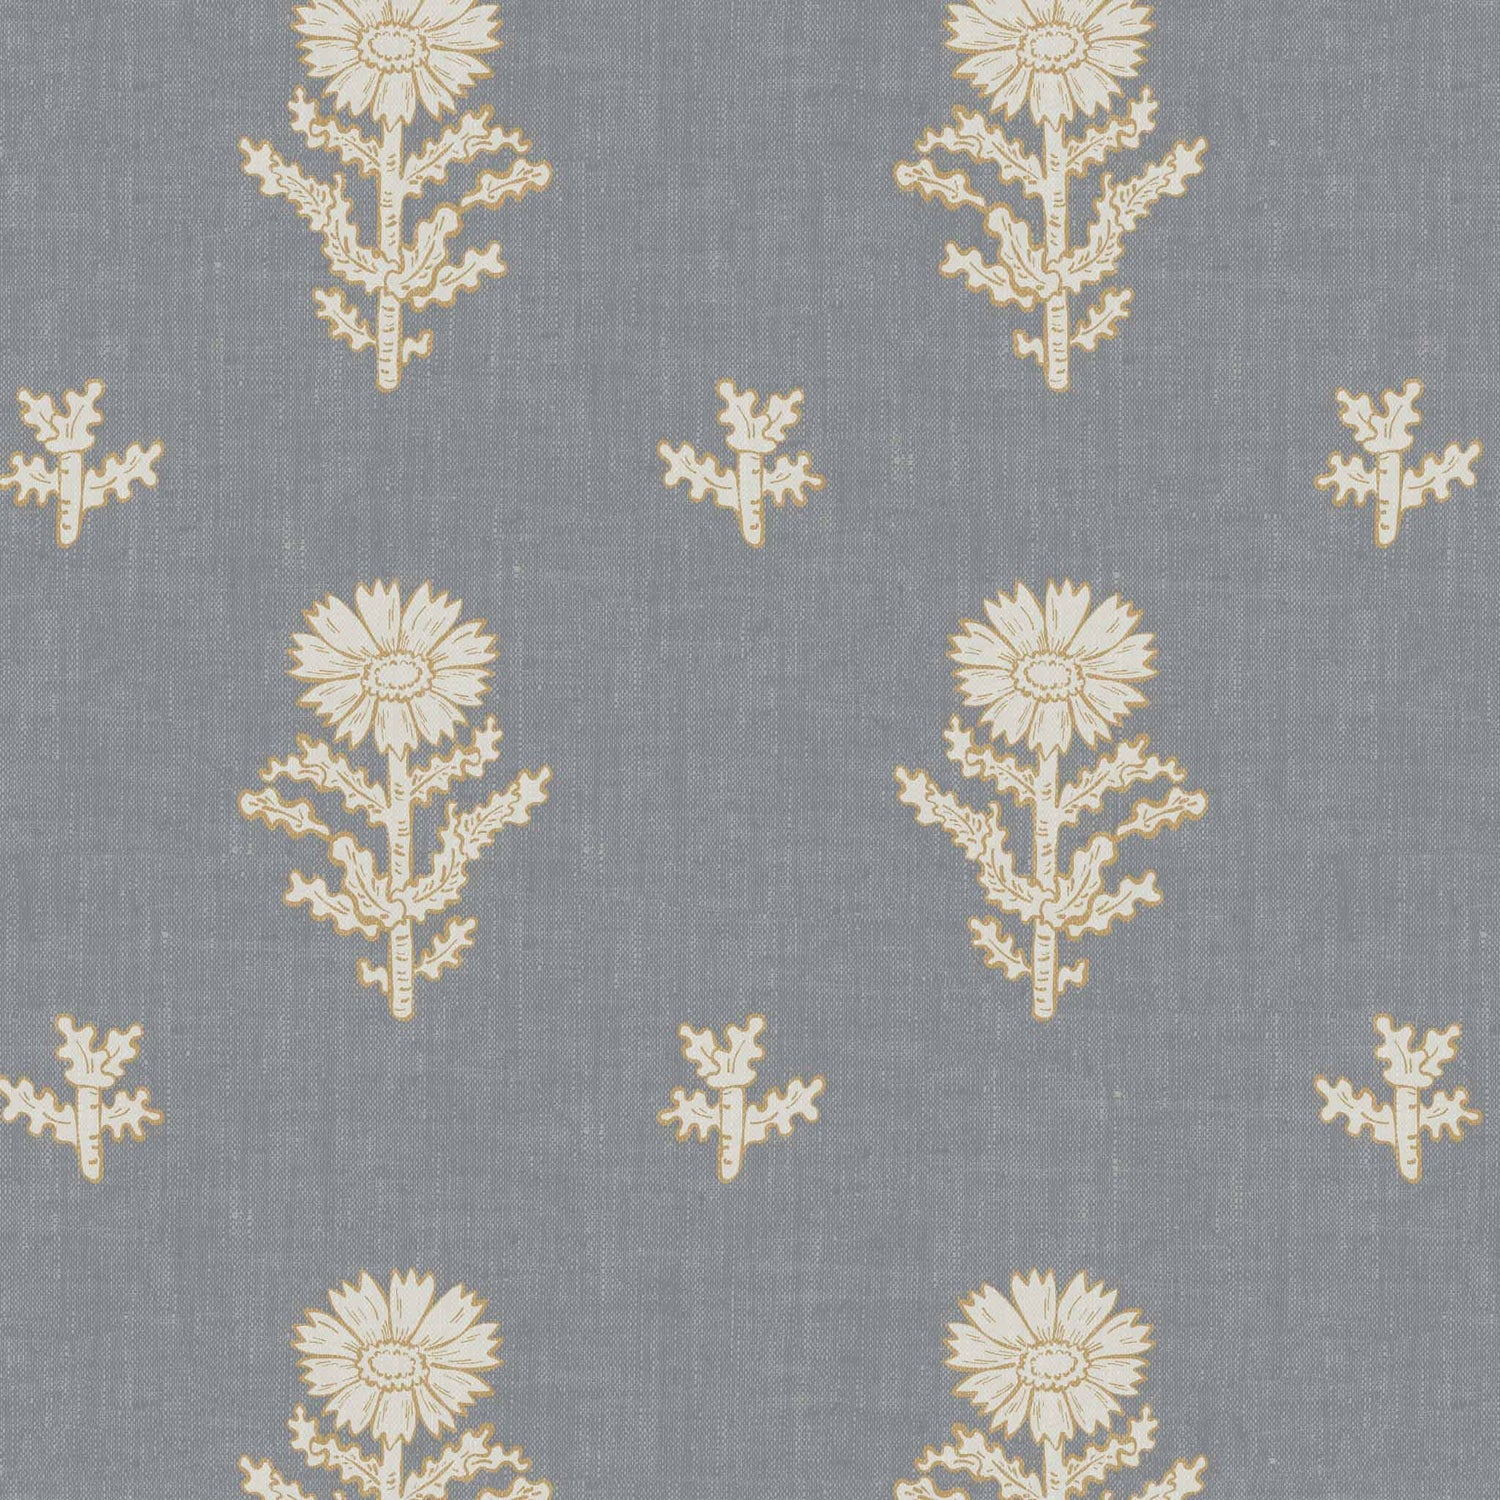 Add a touch of elegance and femininity to any room with our Small Vintage Floral Wallpaper in Denim Blue. Drawing from classic vintage designs, this wallpaper combines delicate florals with soft, subtle tones to create an ambience of comfort and refinement.